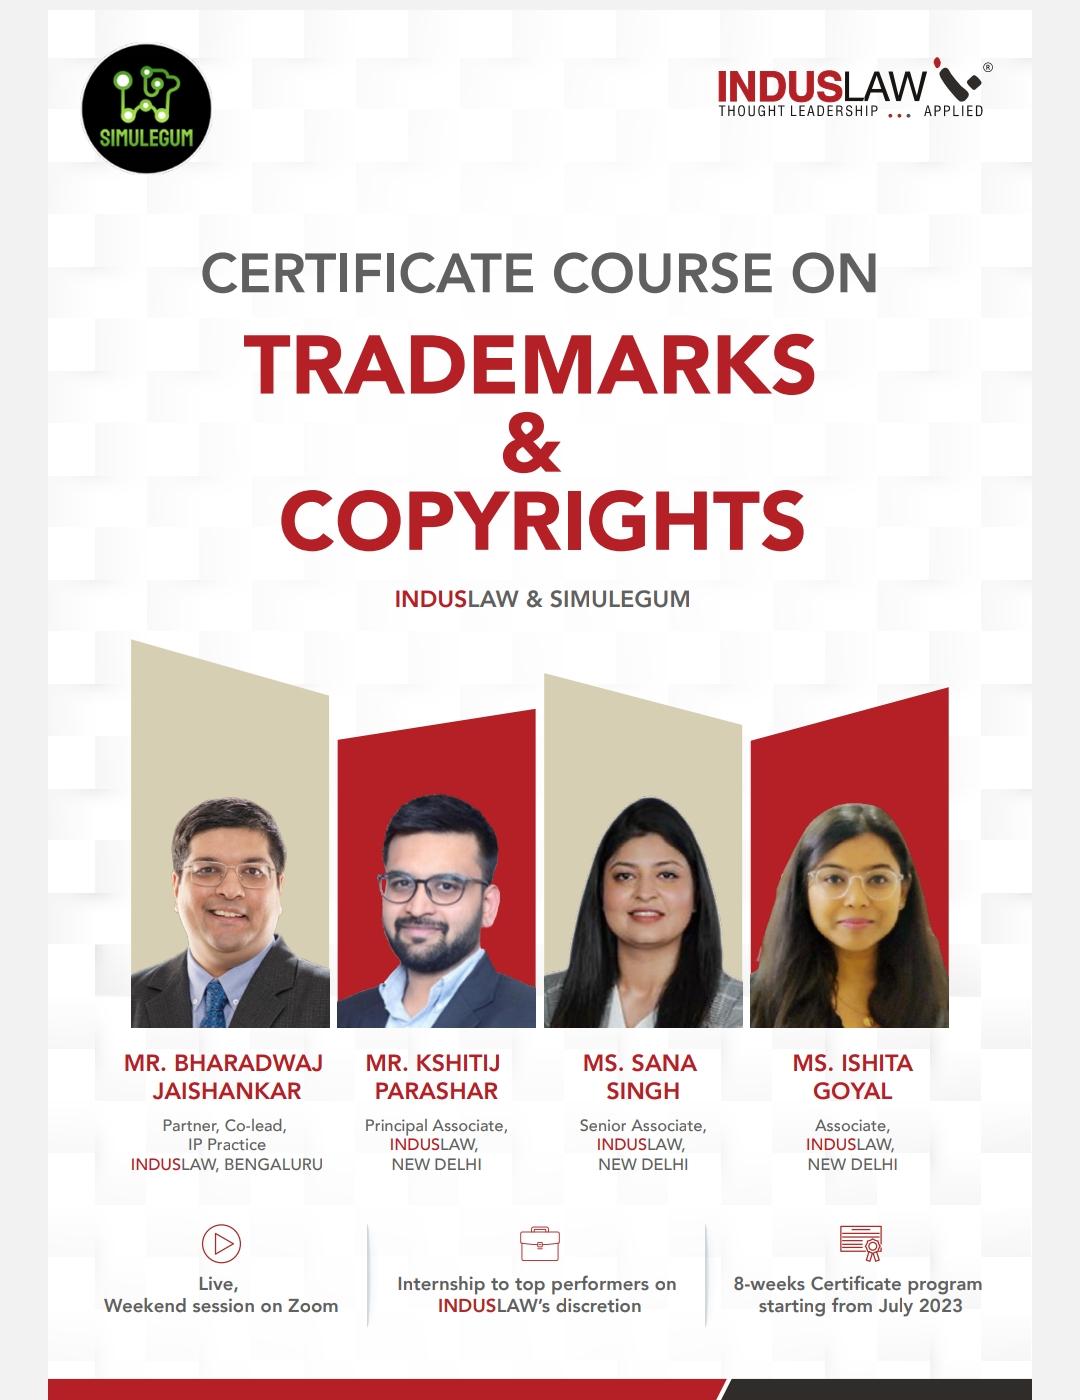 Certificate Course on Trademarks and Copyrights by IndusLaw and SimuLegum